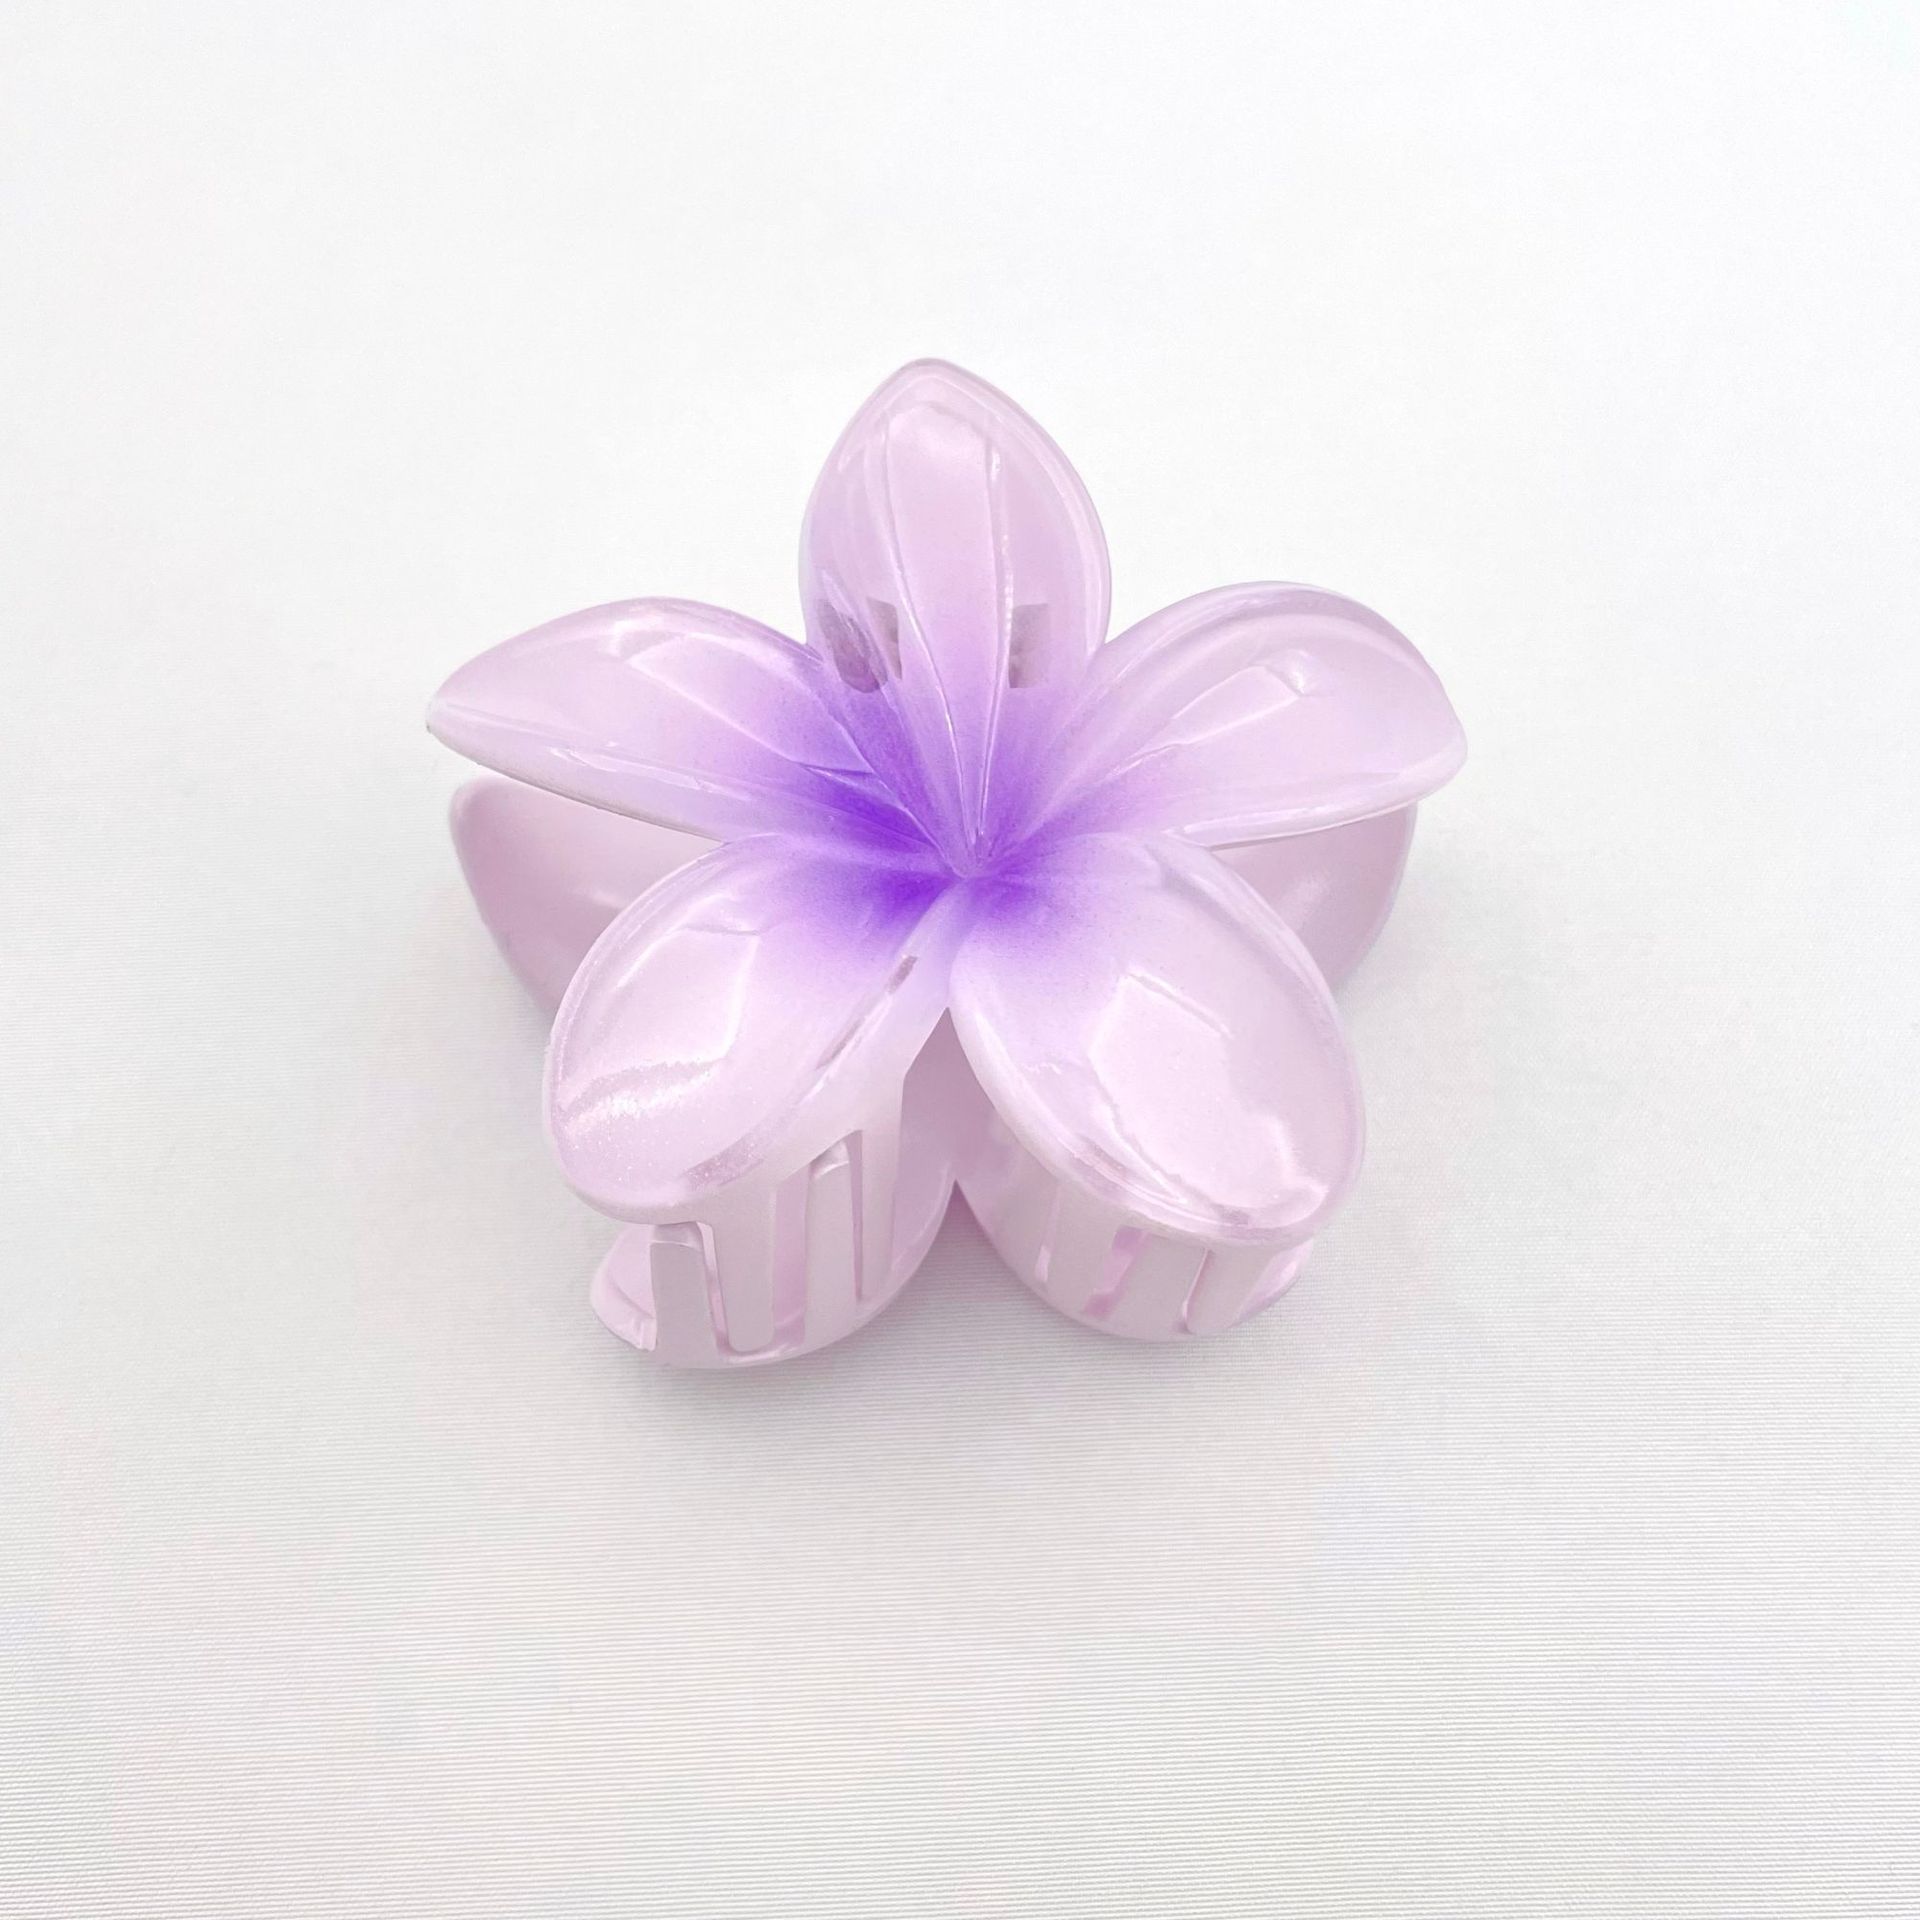 Europe and America Cross Border Plumeria Rubra Grip Holiday Hot Selling Side Catch Barrettes Updo Shark Clip Hair Accessories Wholesale